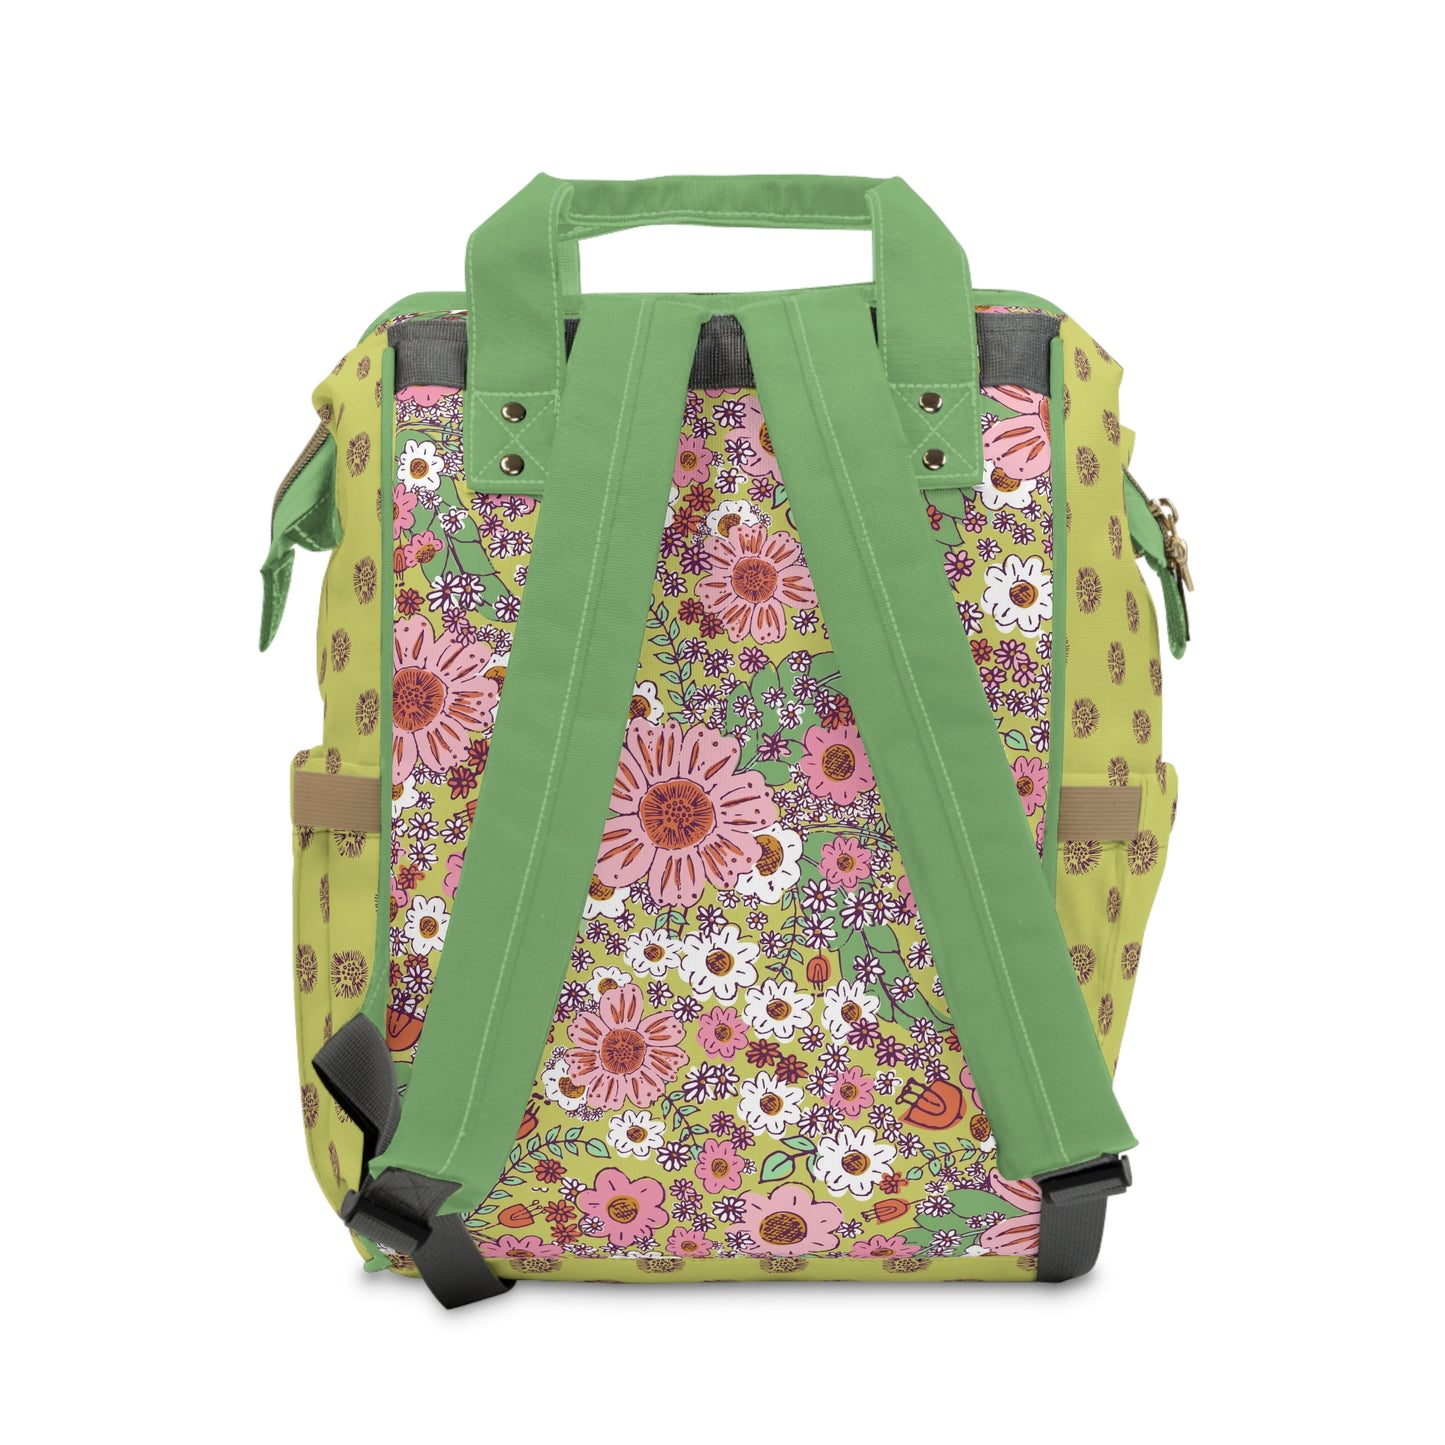 Cheerful Watercolor Flowers on Bright Green Multifunctional Diaper Backpack